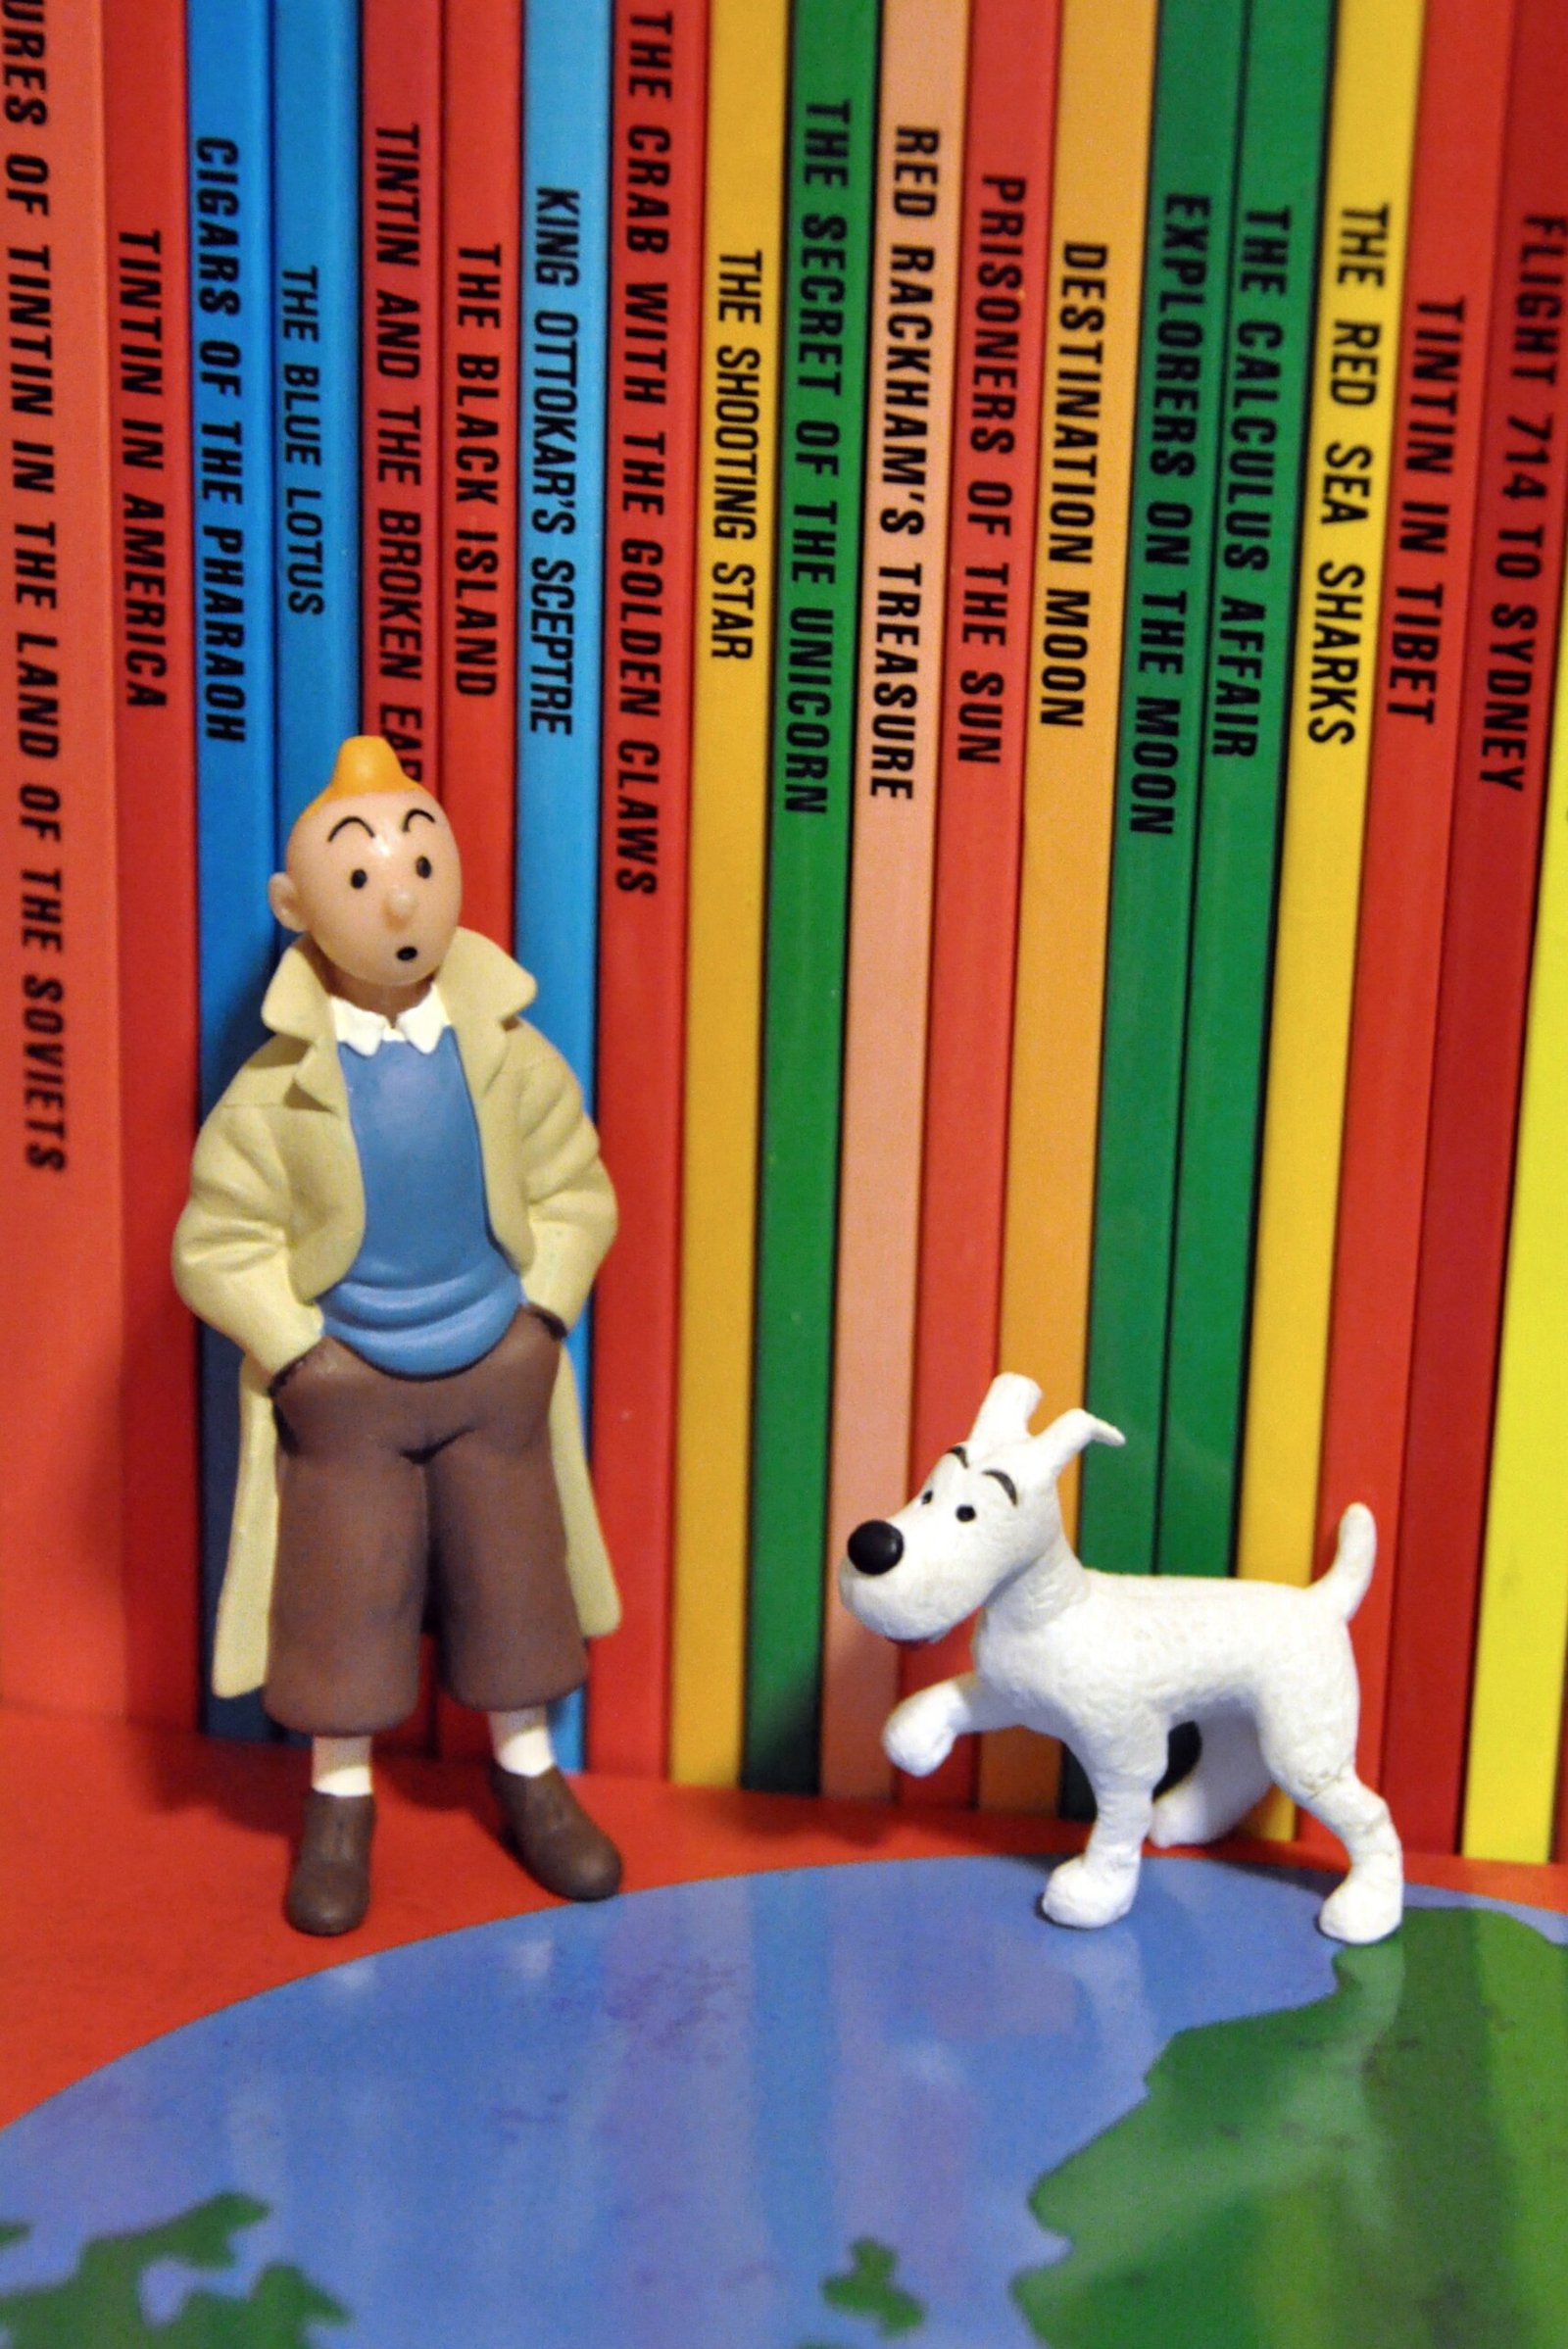 Tintin figurines in front of the stories